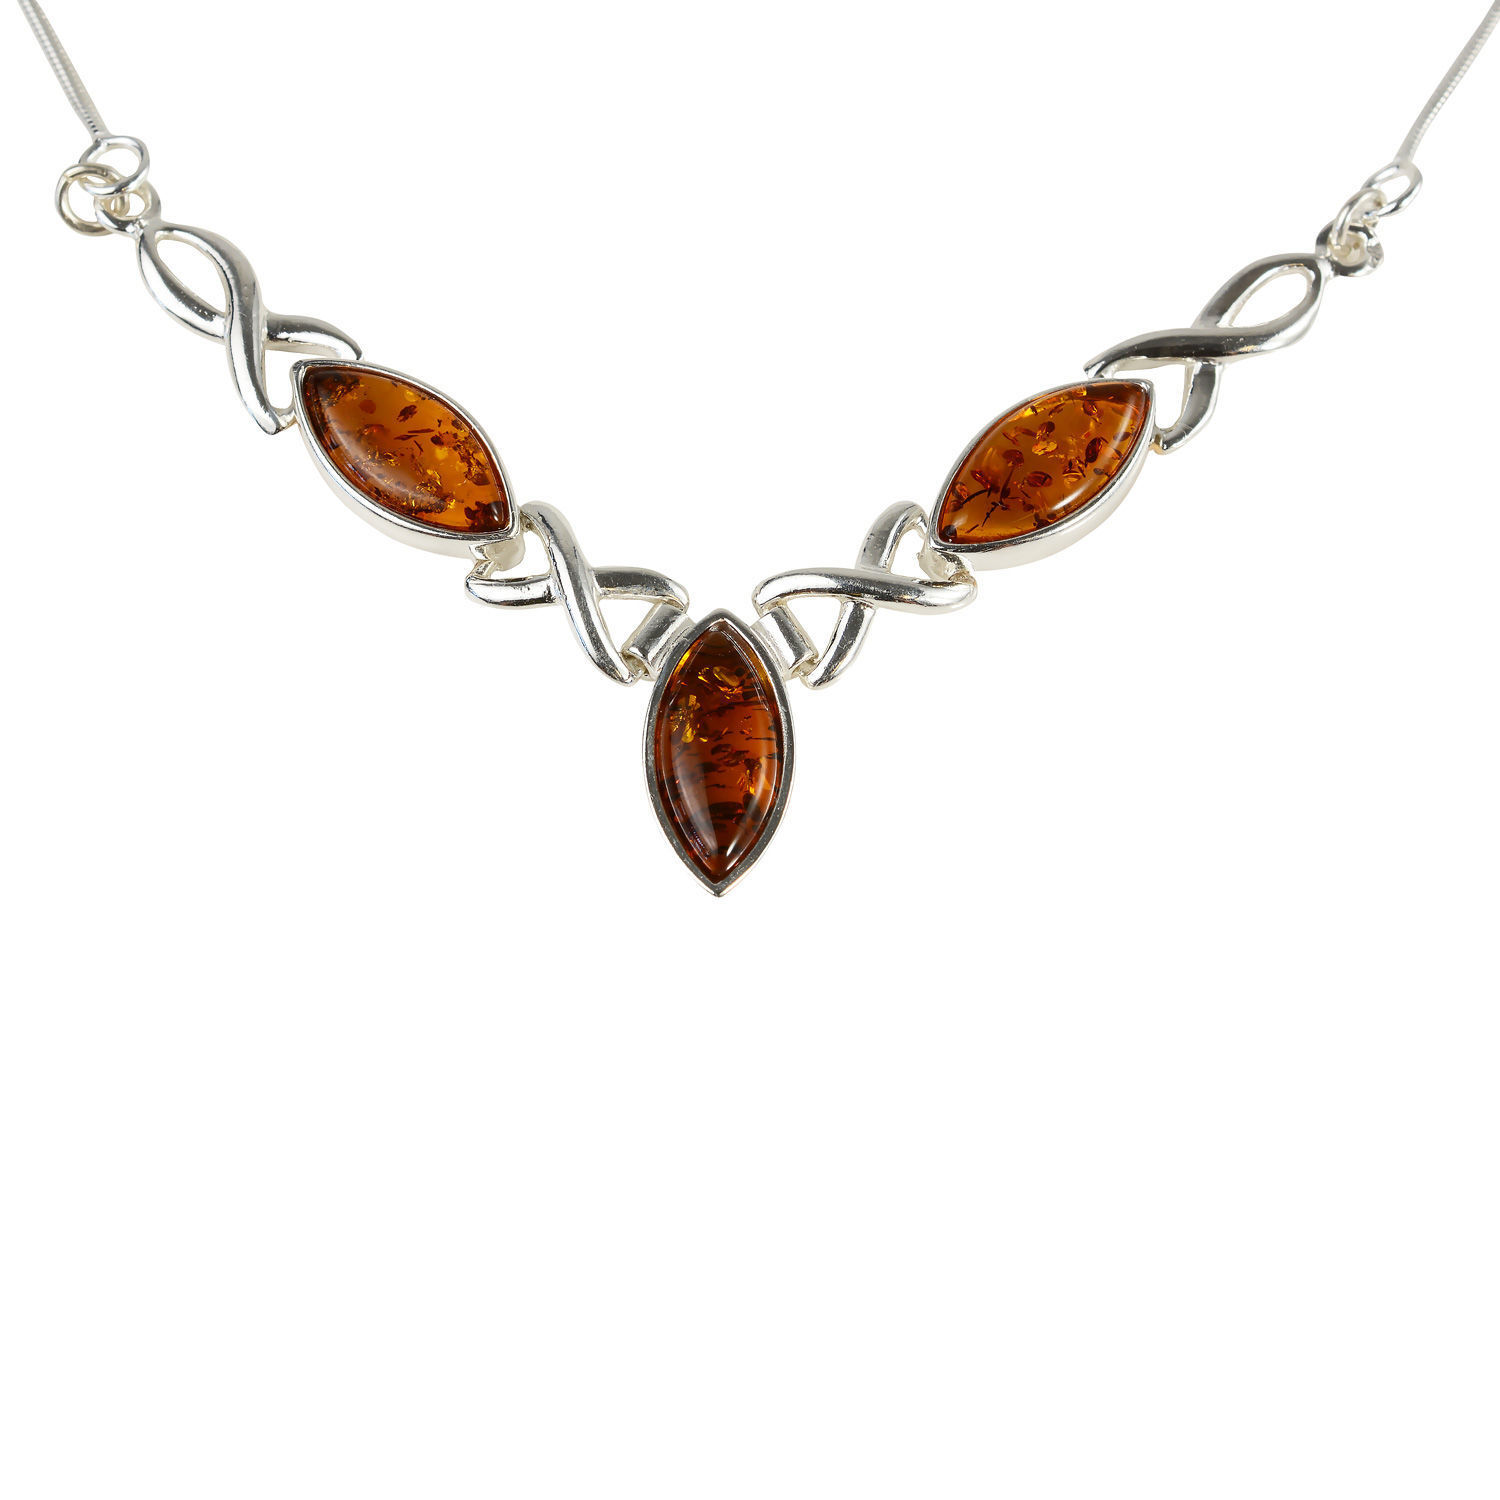 Sterling Silver and Baltic Honey Amber Necklace 